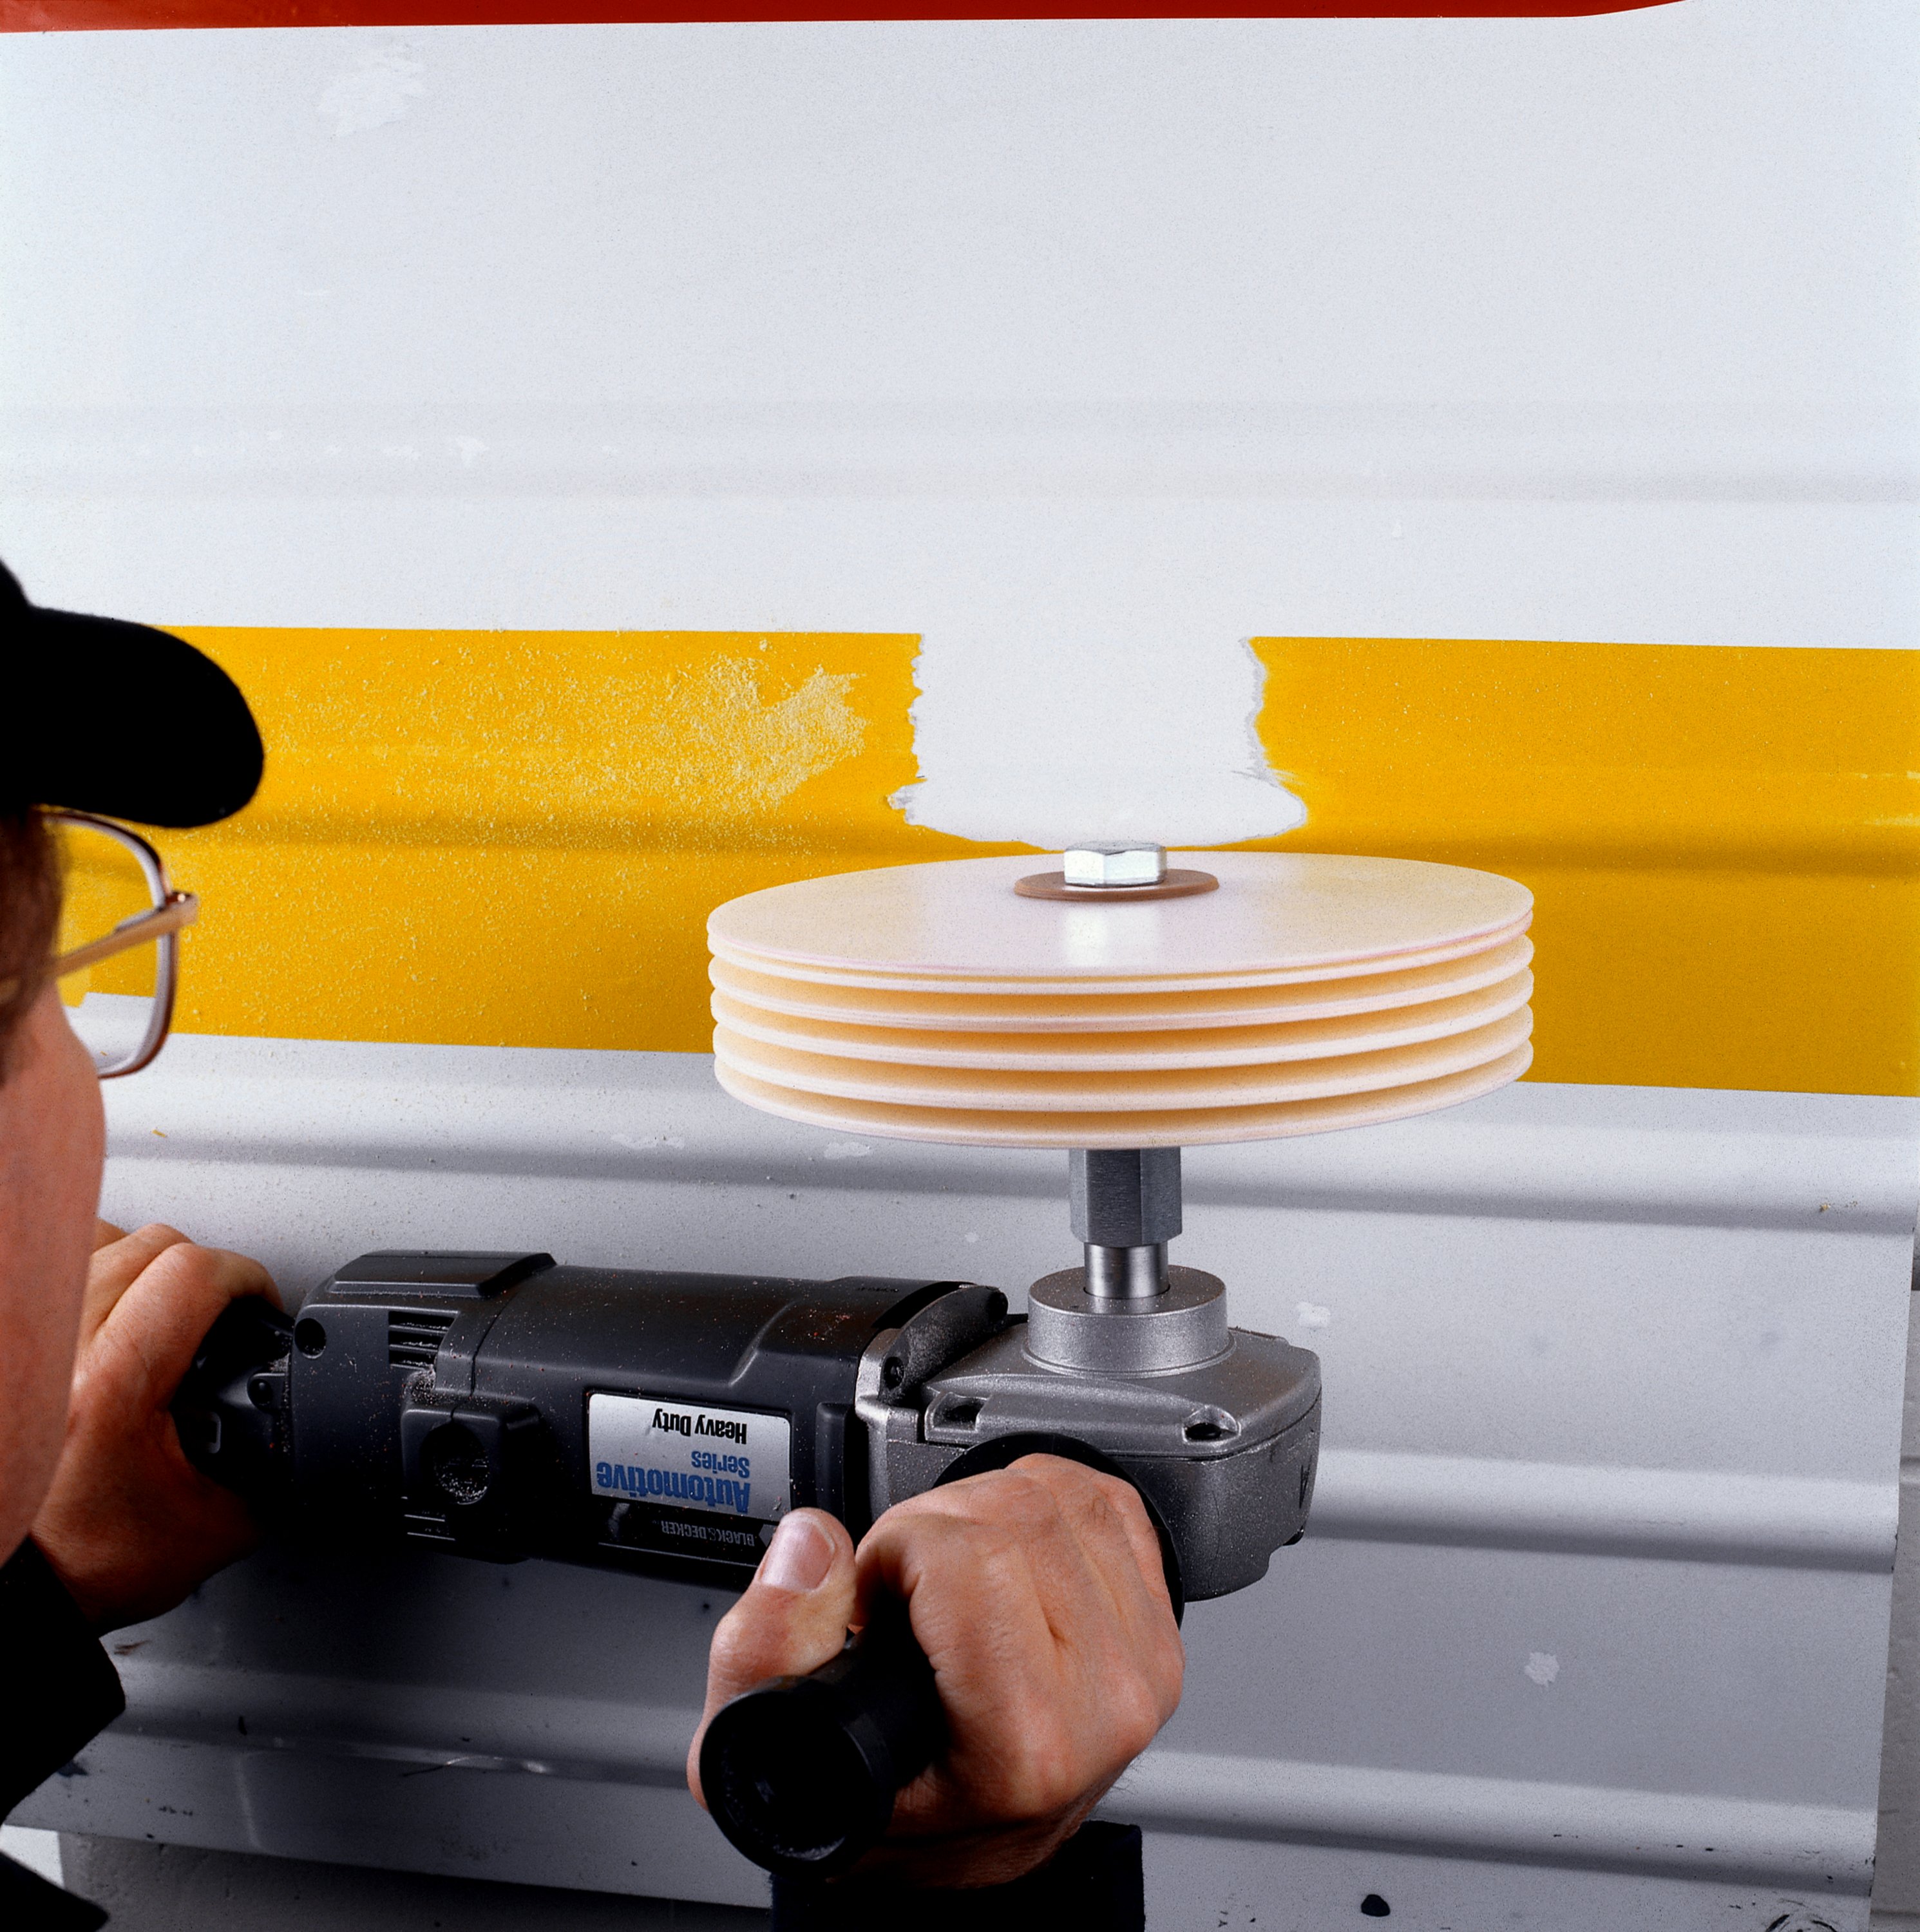 The disc creates friction and heat as it spins in order to cleanly extract adhesives and stripes. Subsequently, prep work with heat tools — like blow dryers, heat lamps and guns — is no longer needed, helping to increase productivity and speed the removal process.